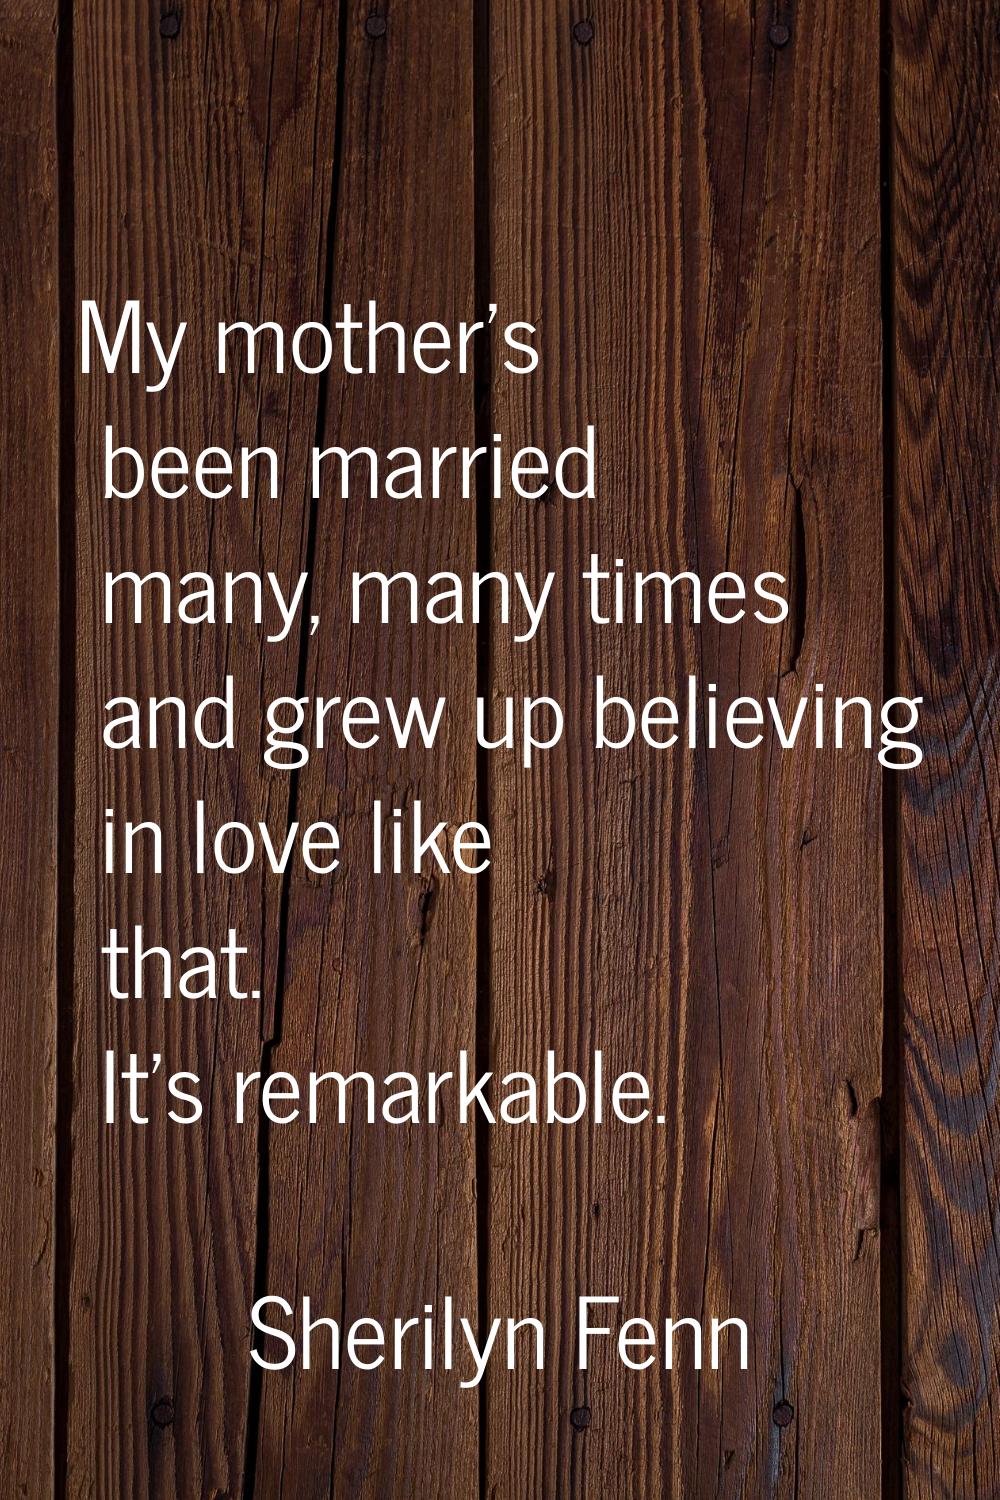 My mother's been married many, many times and grew up believing in love like that. It's remarkable.